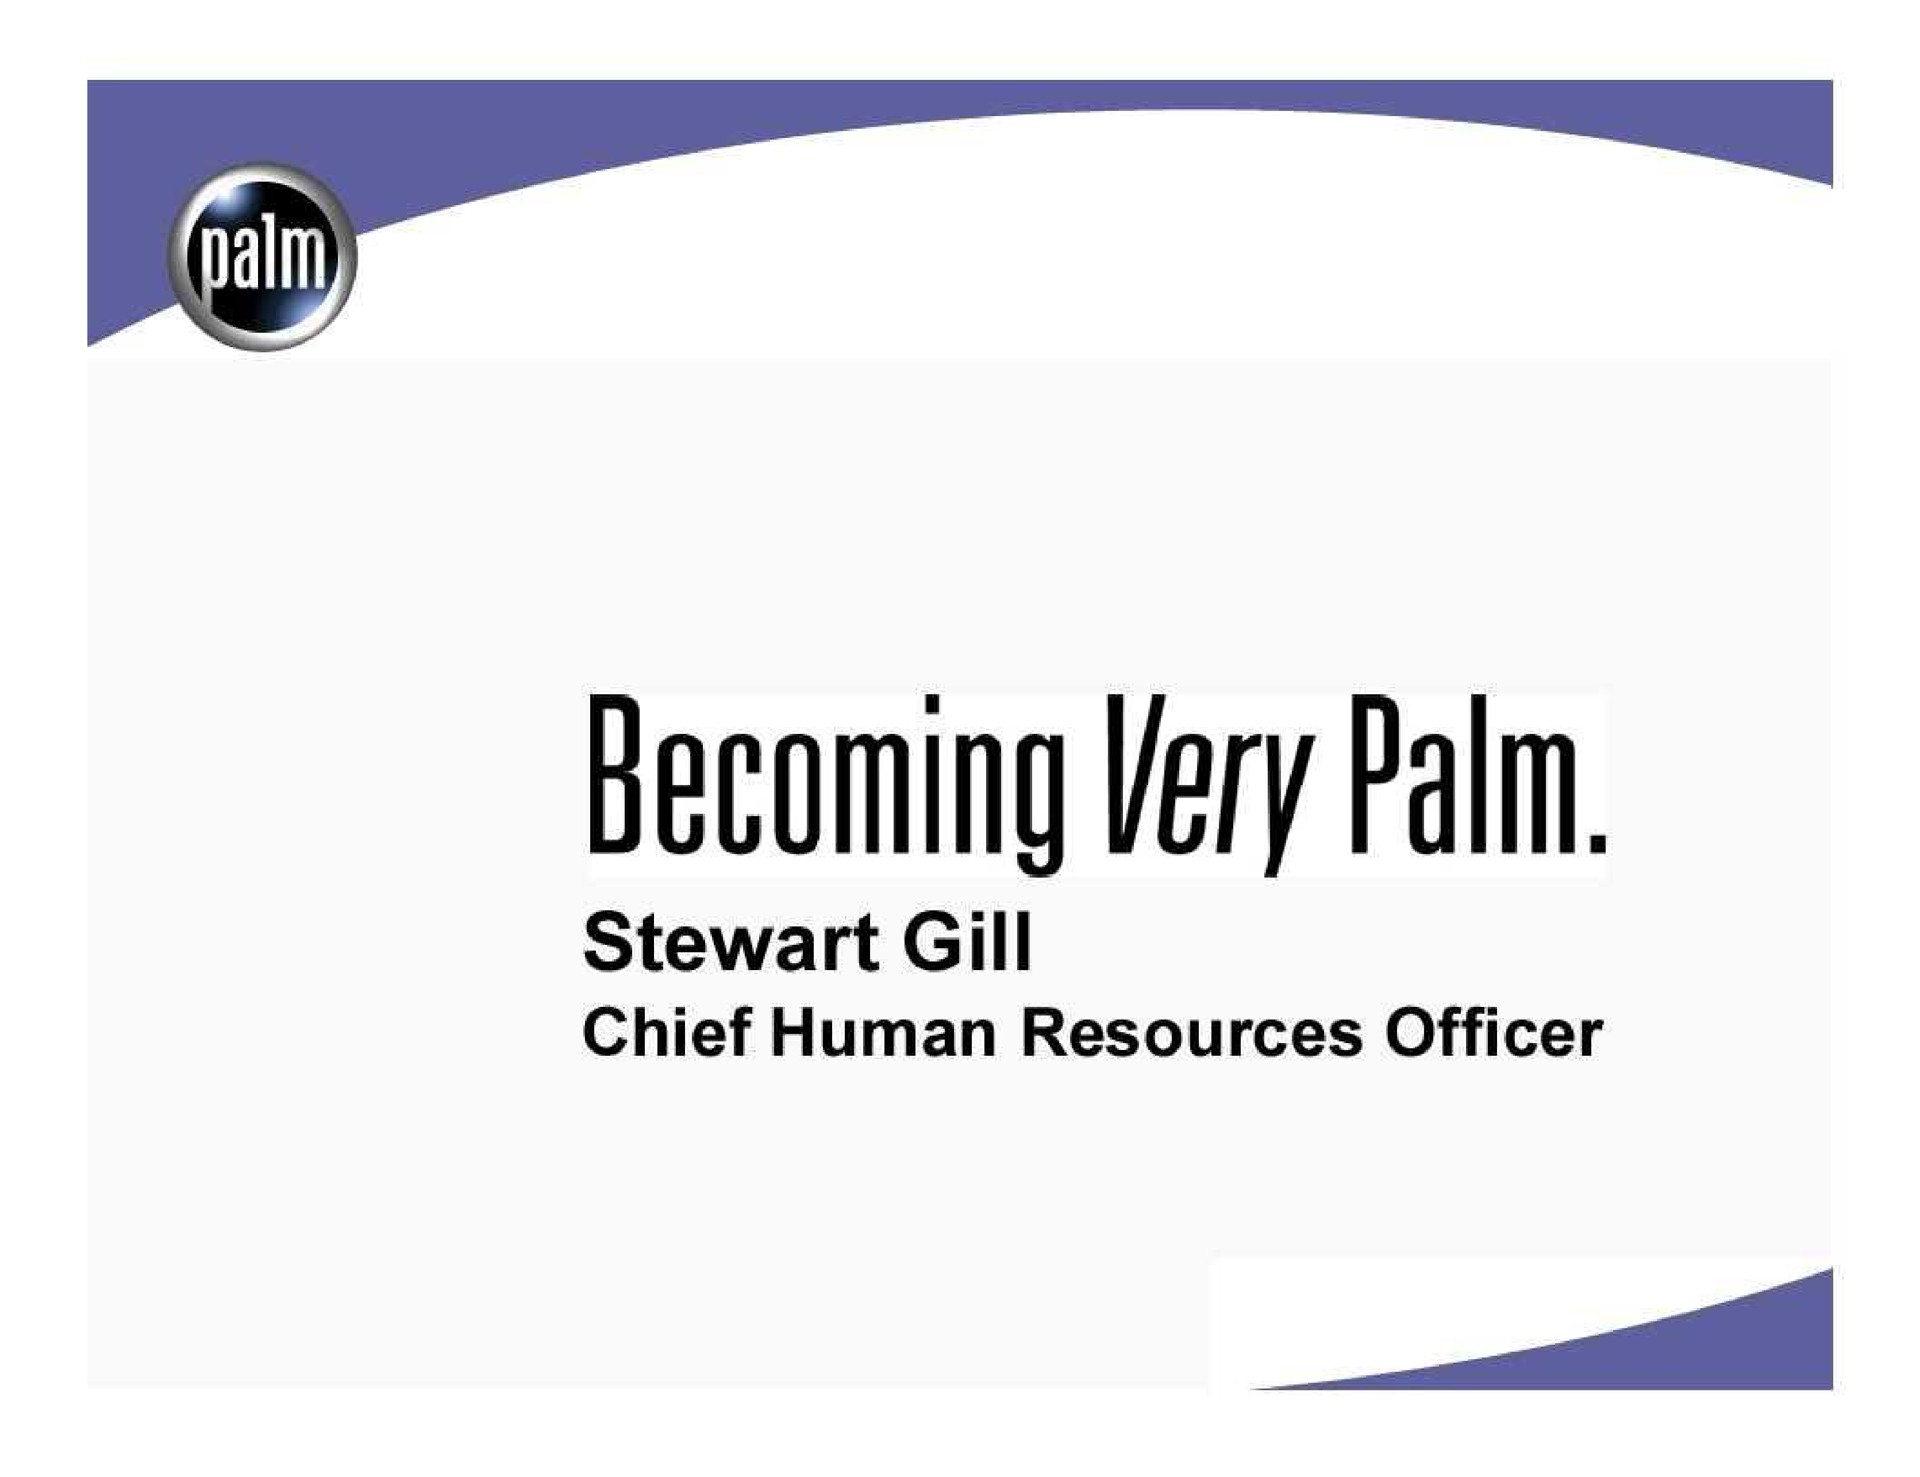 becoming very palm gill | Palm Inc.